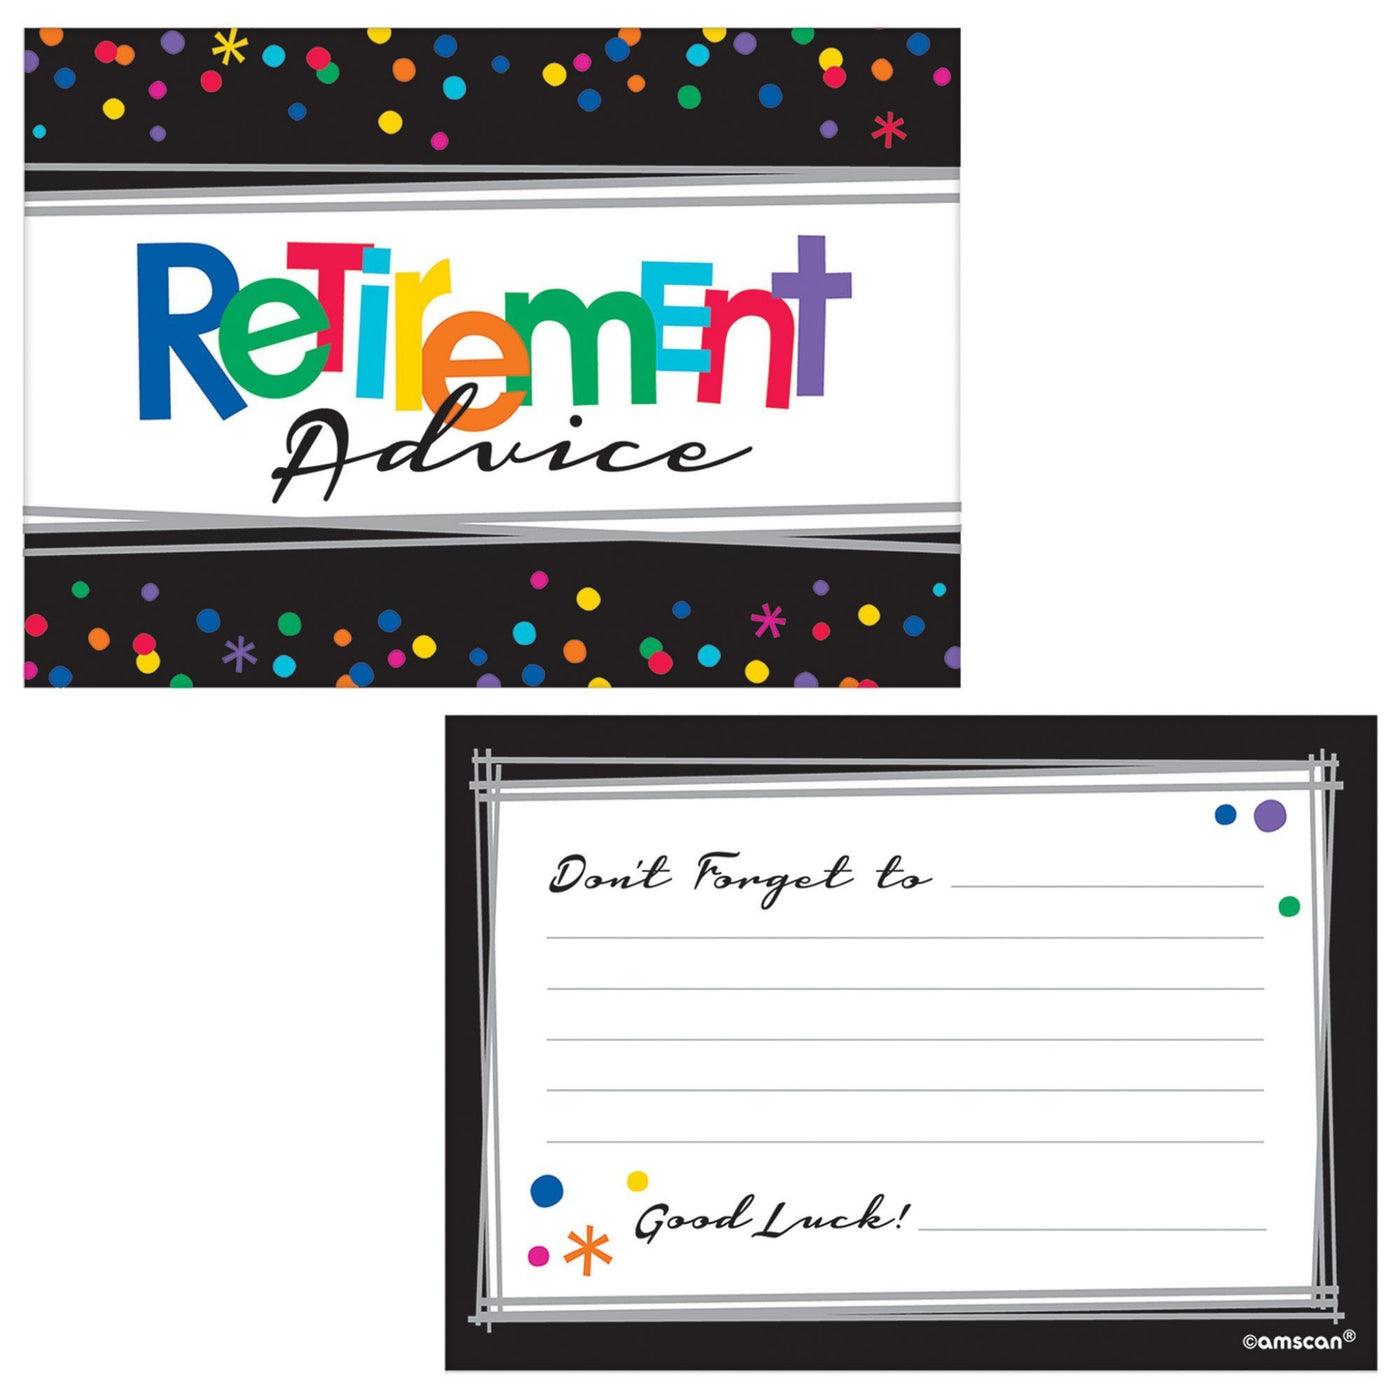 Officially Retired Retirement Advice Cards